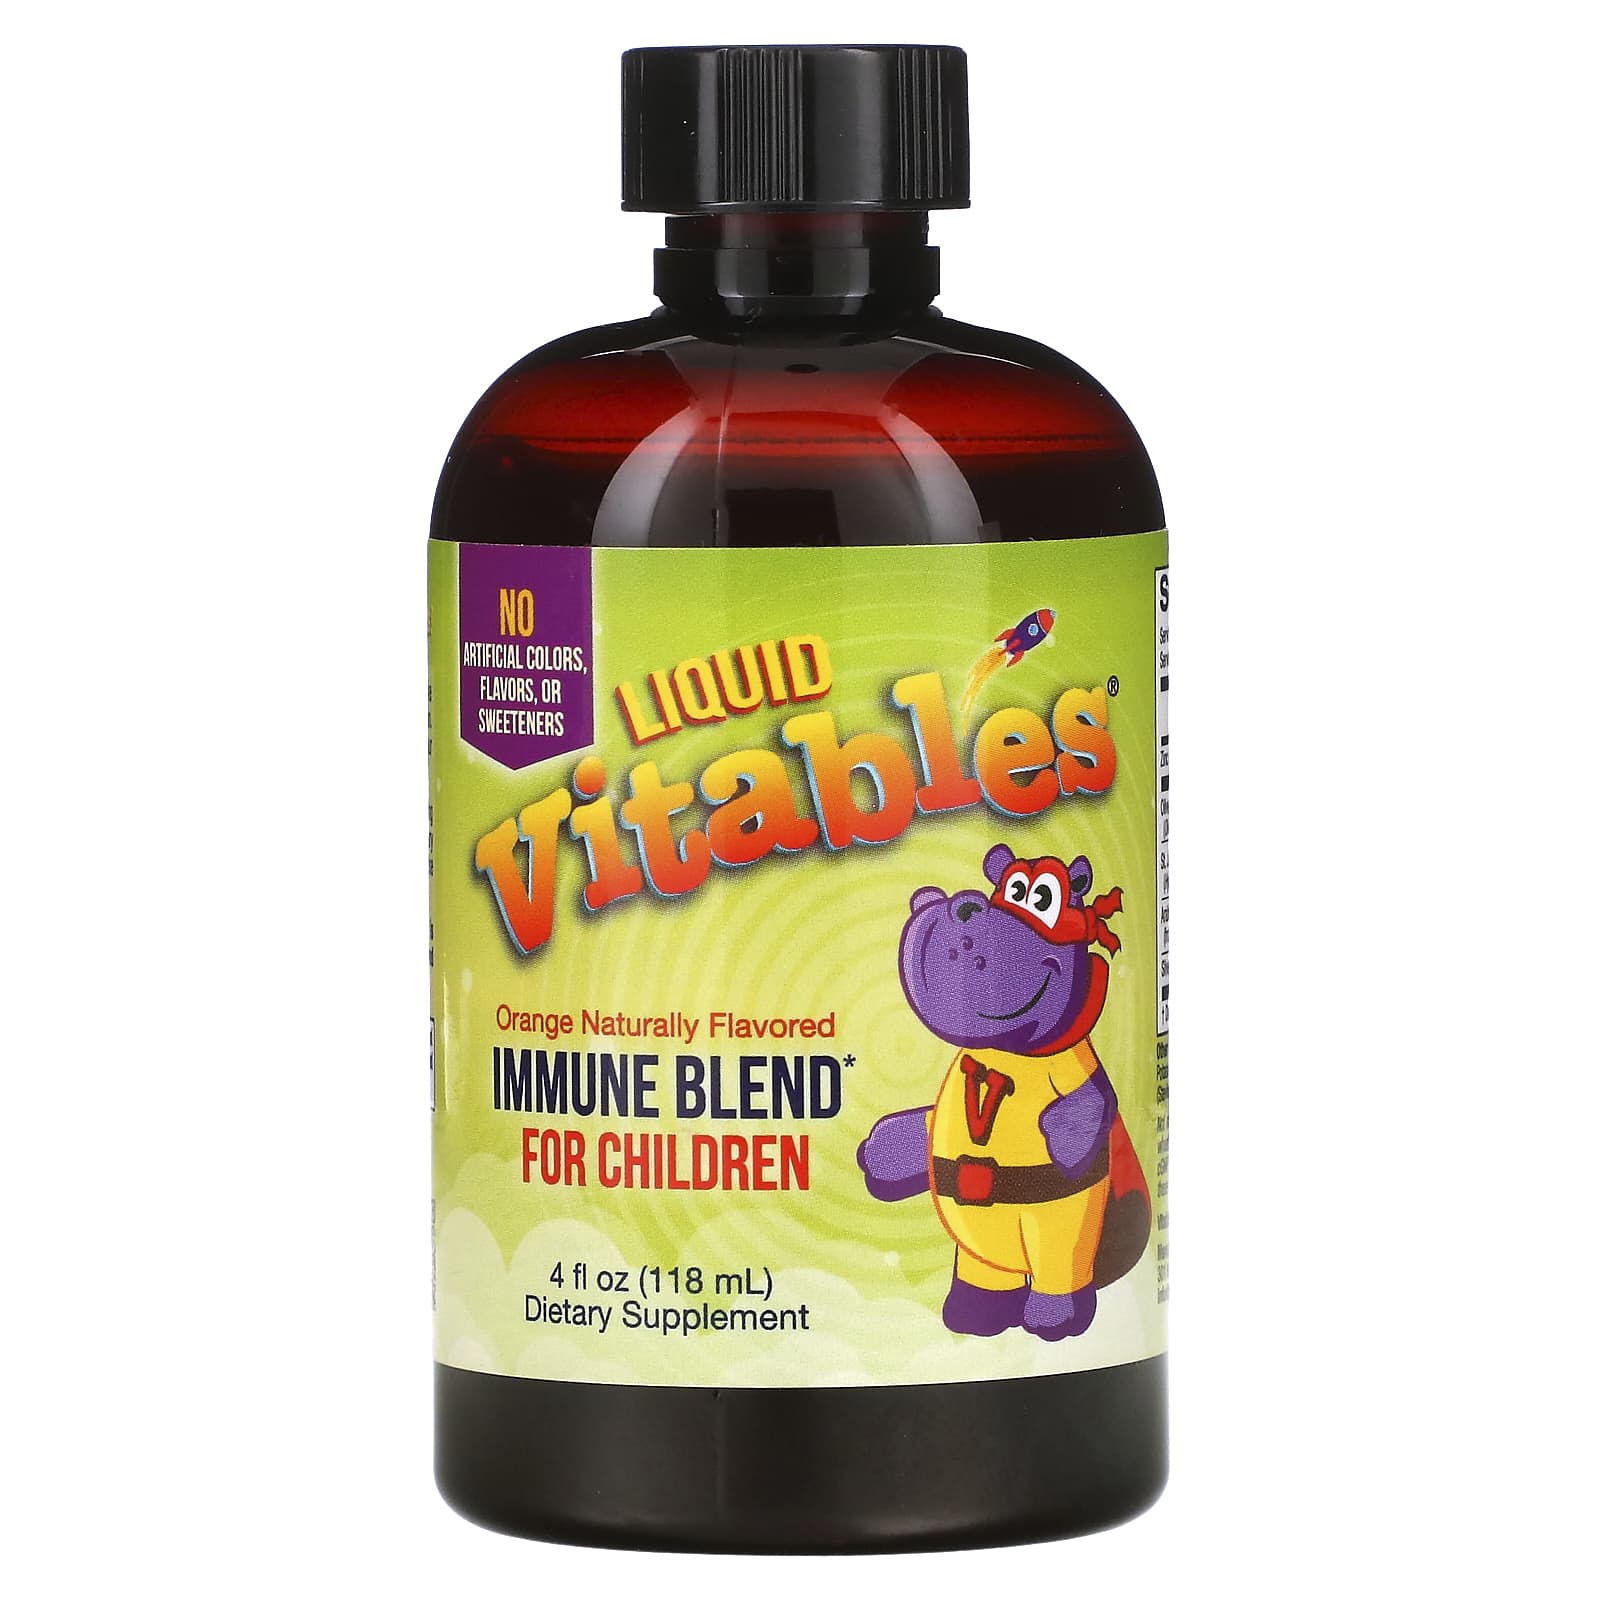 Vitables, Liquid Immune Blend for Children Get it now with 51% off